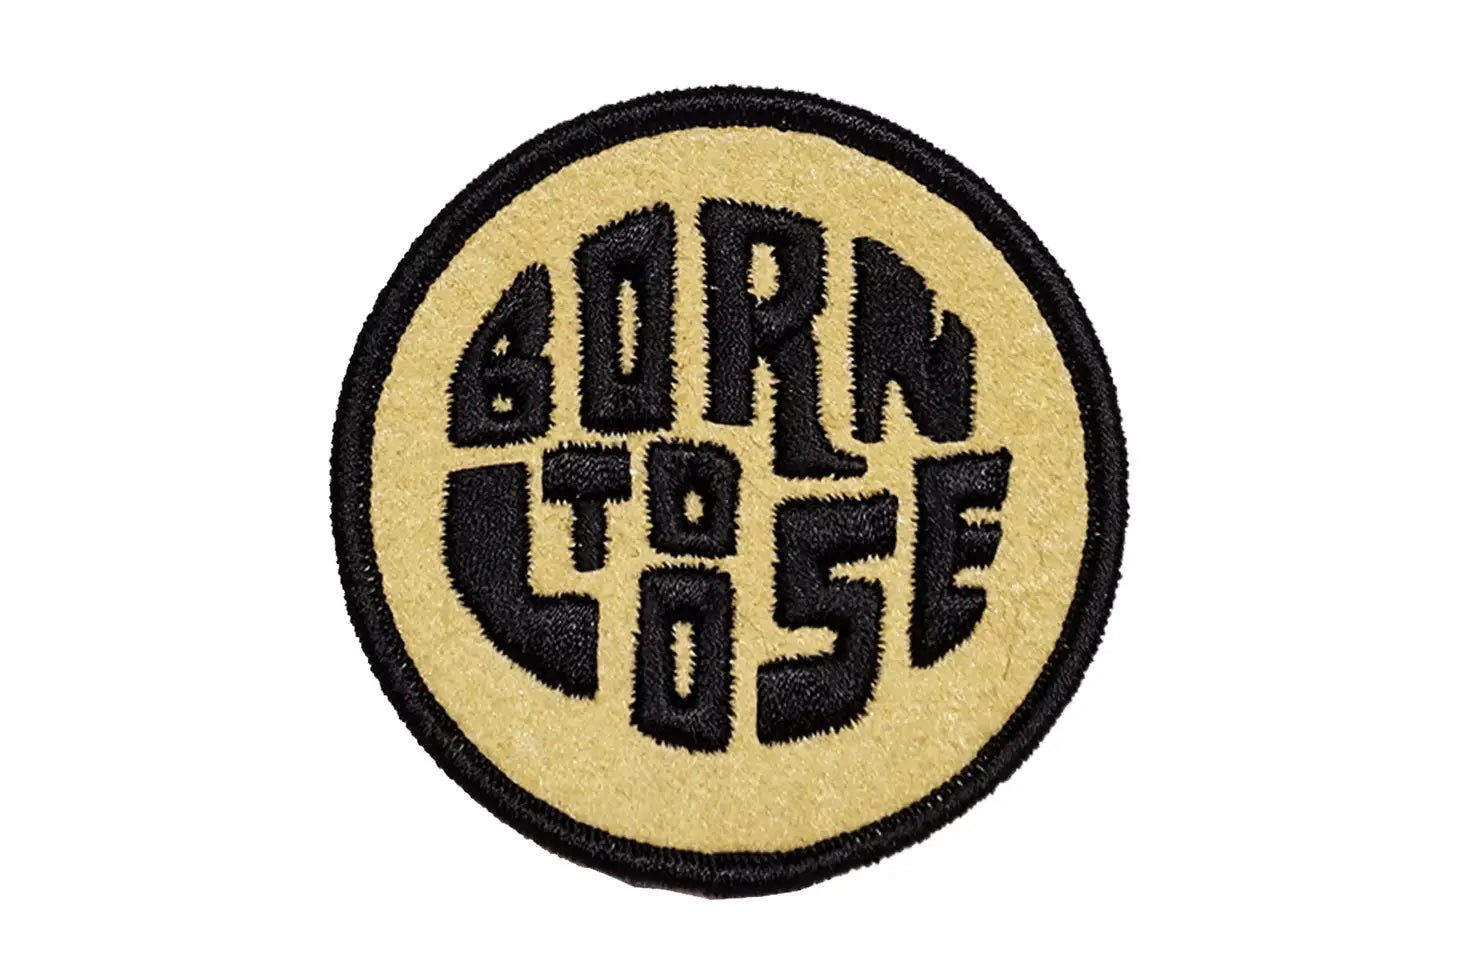 'Born to lose' Embroidered Patch